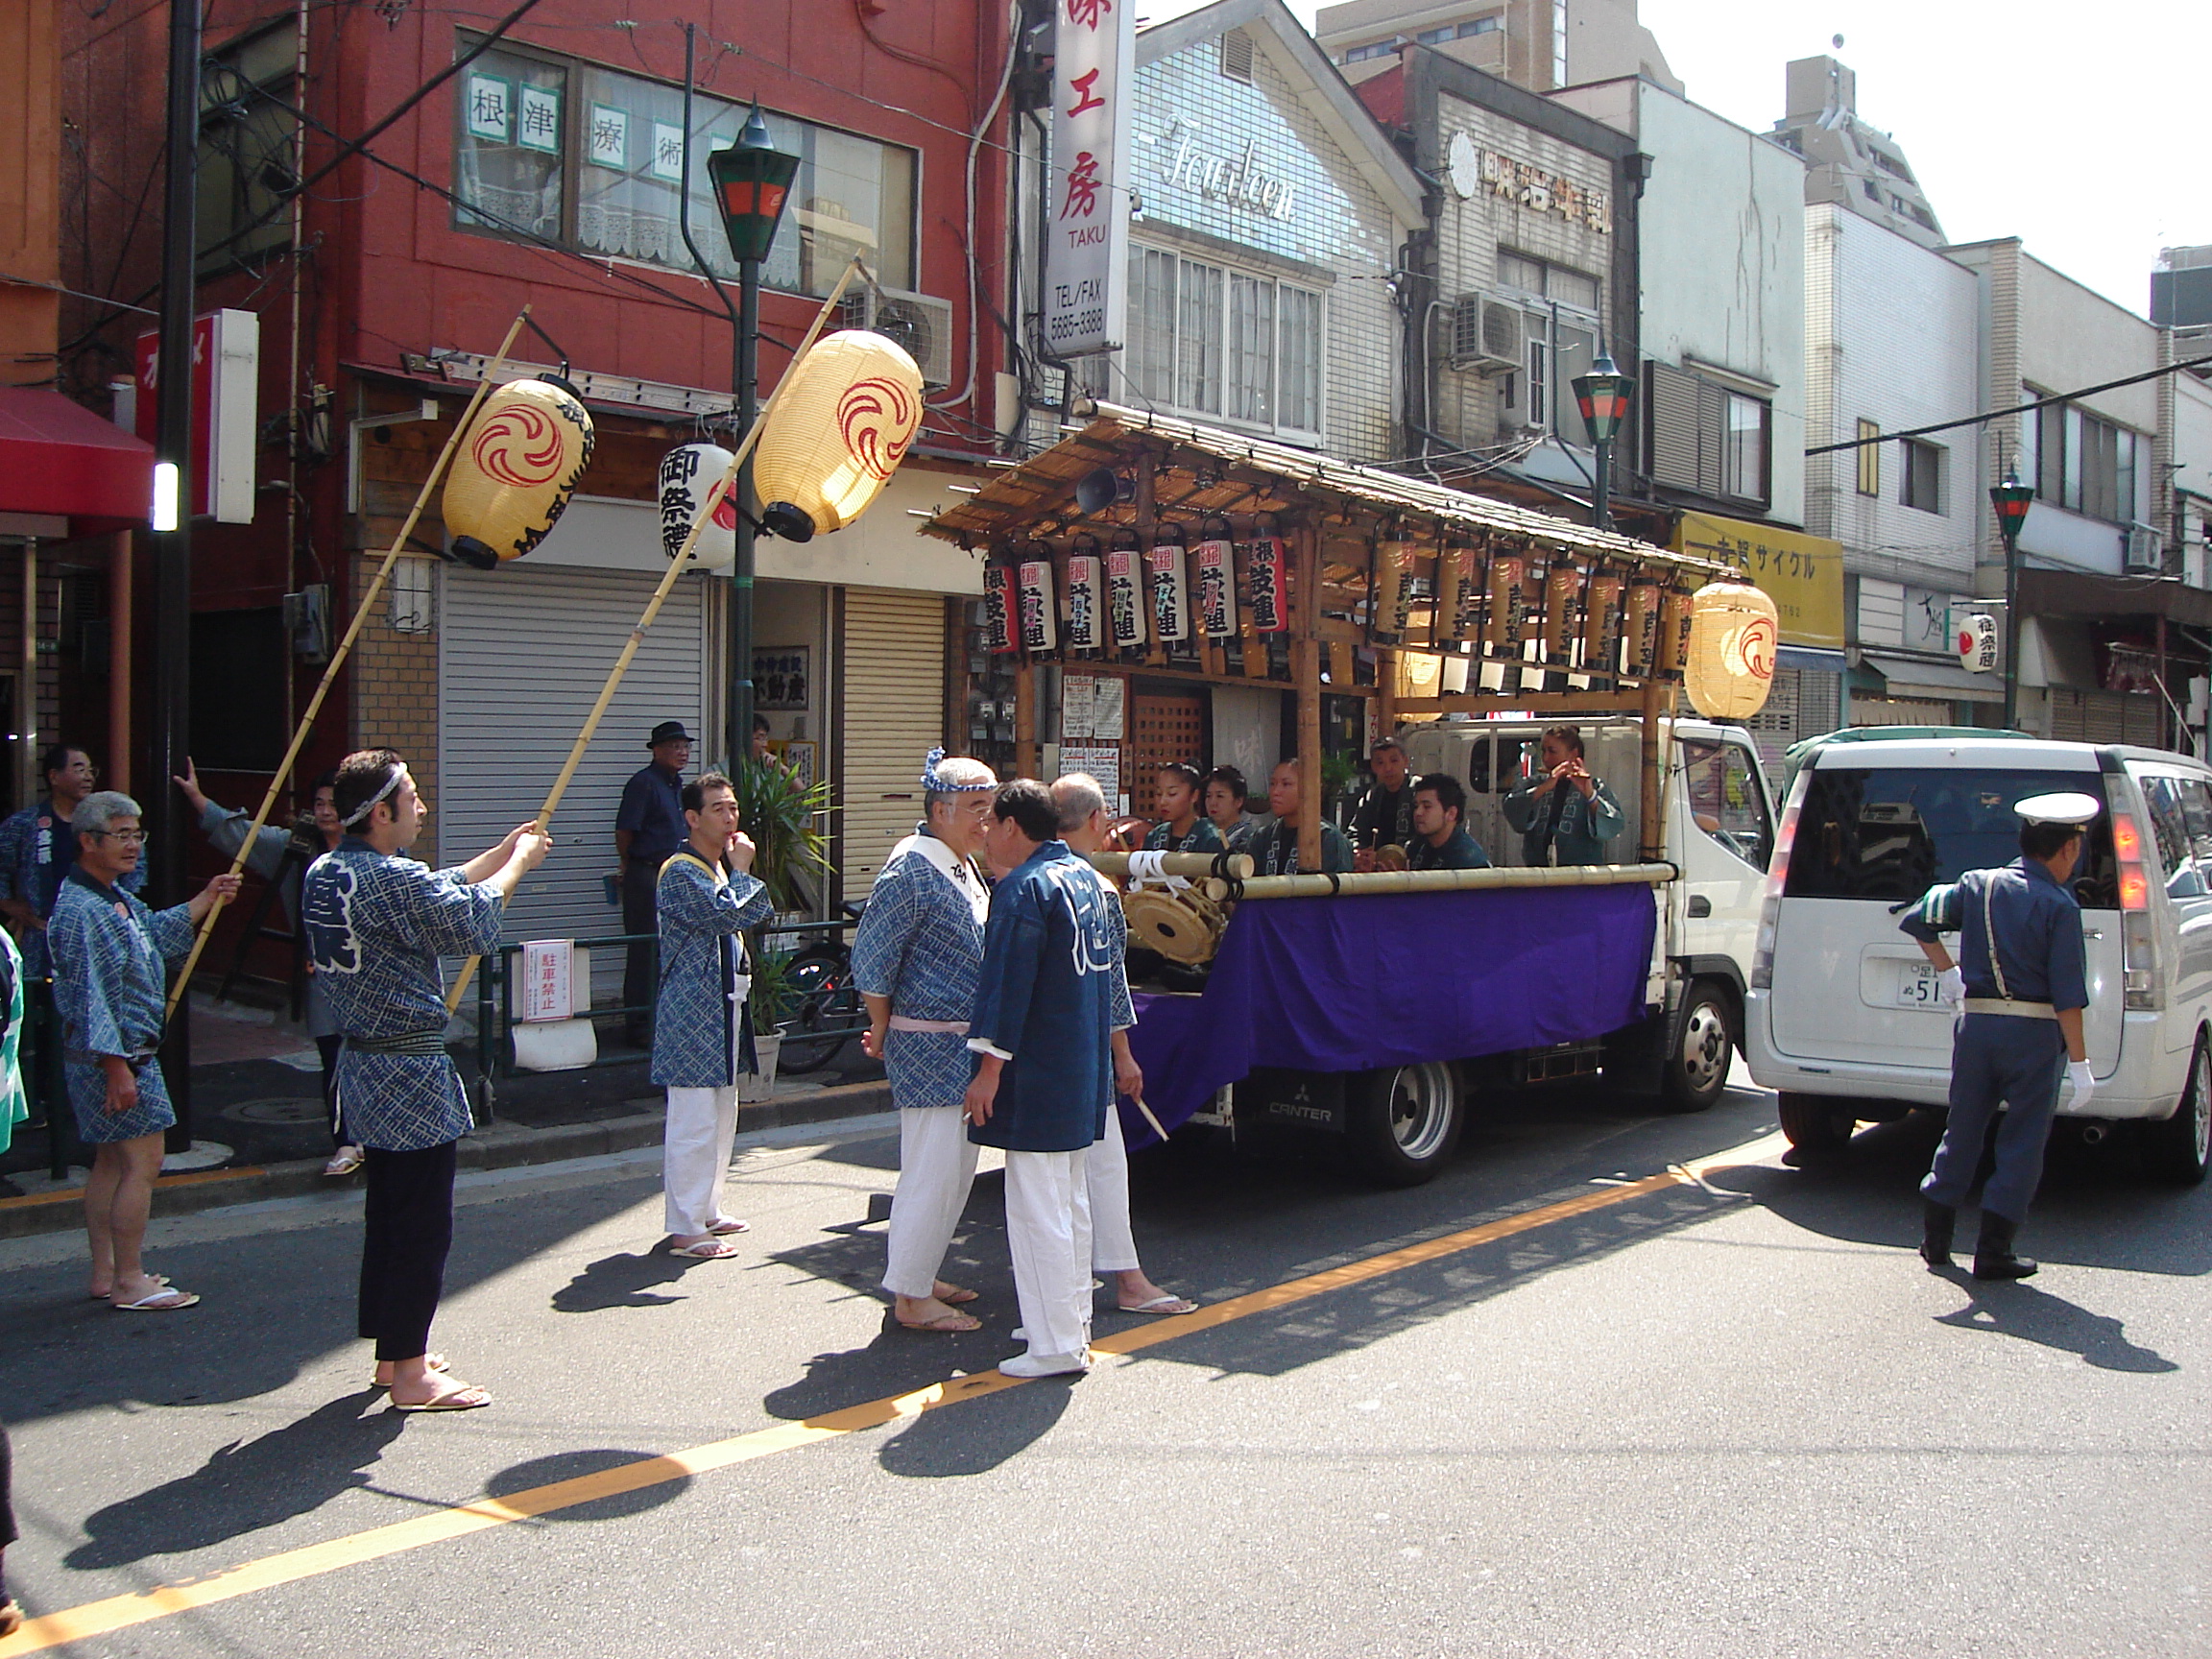 the procession includes a small decorated truck with people in the bed